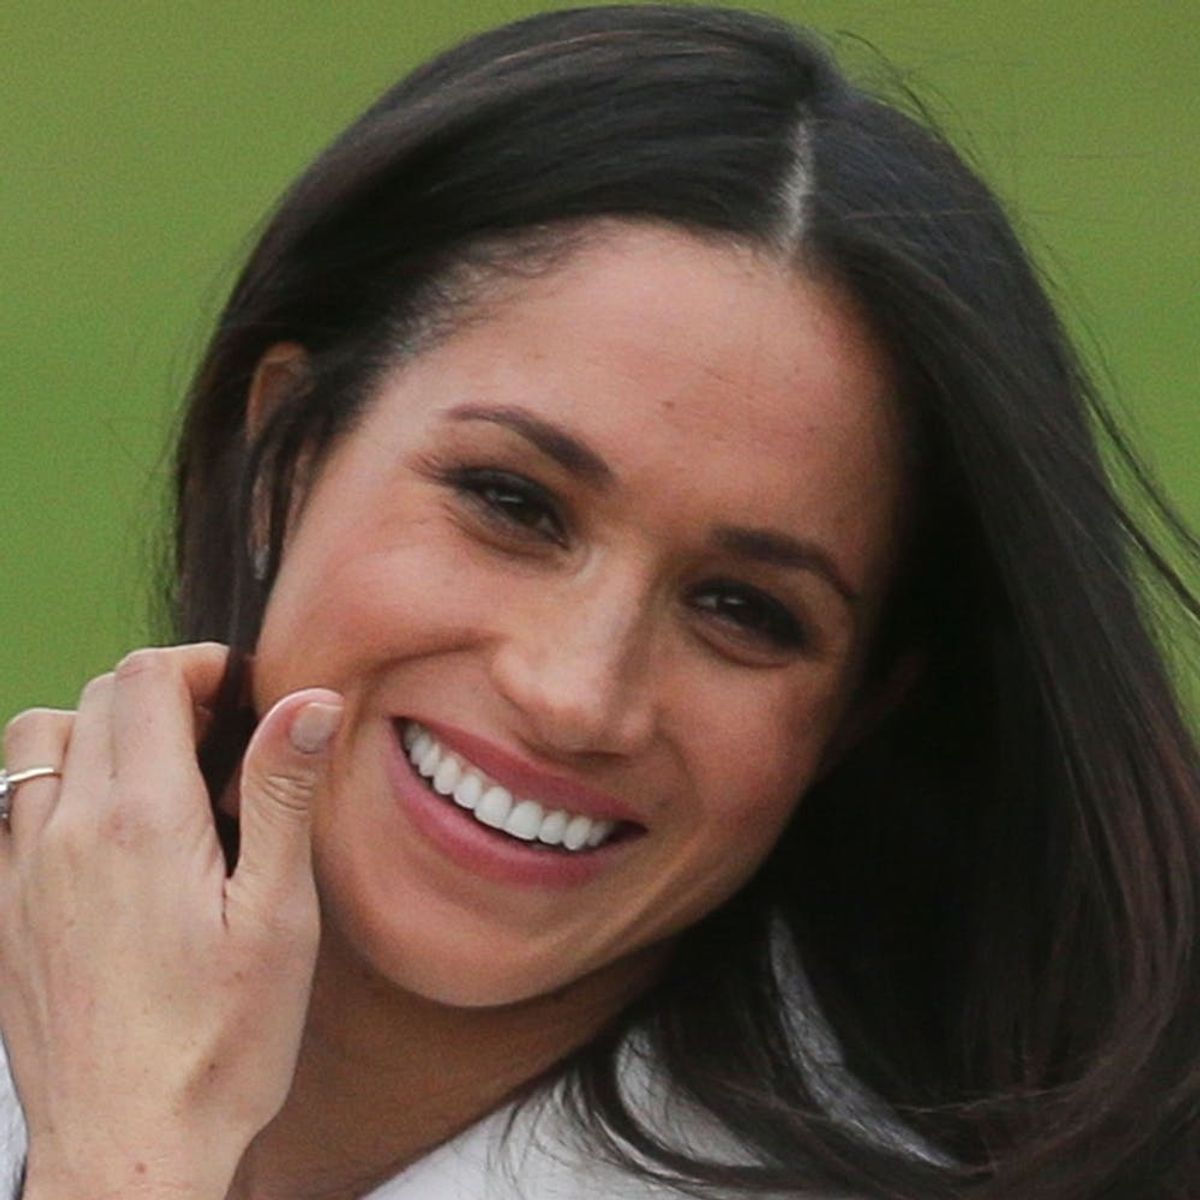 Meghan Markle May Have Already Given Us a BIG Clue About What Her Wedding Dress Will Look Like